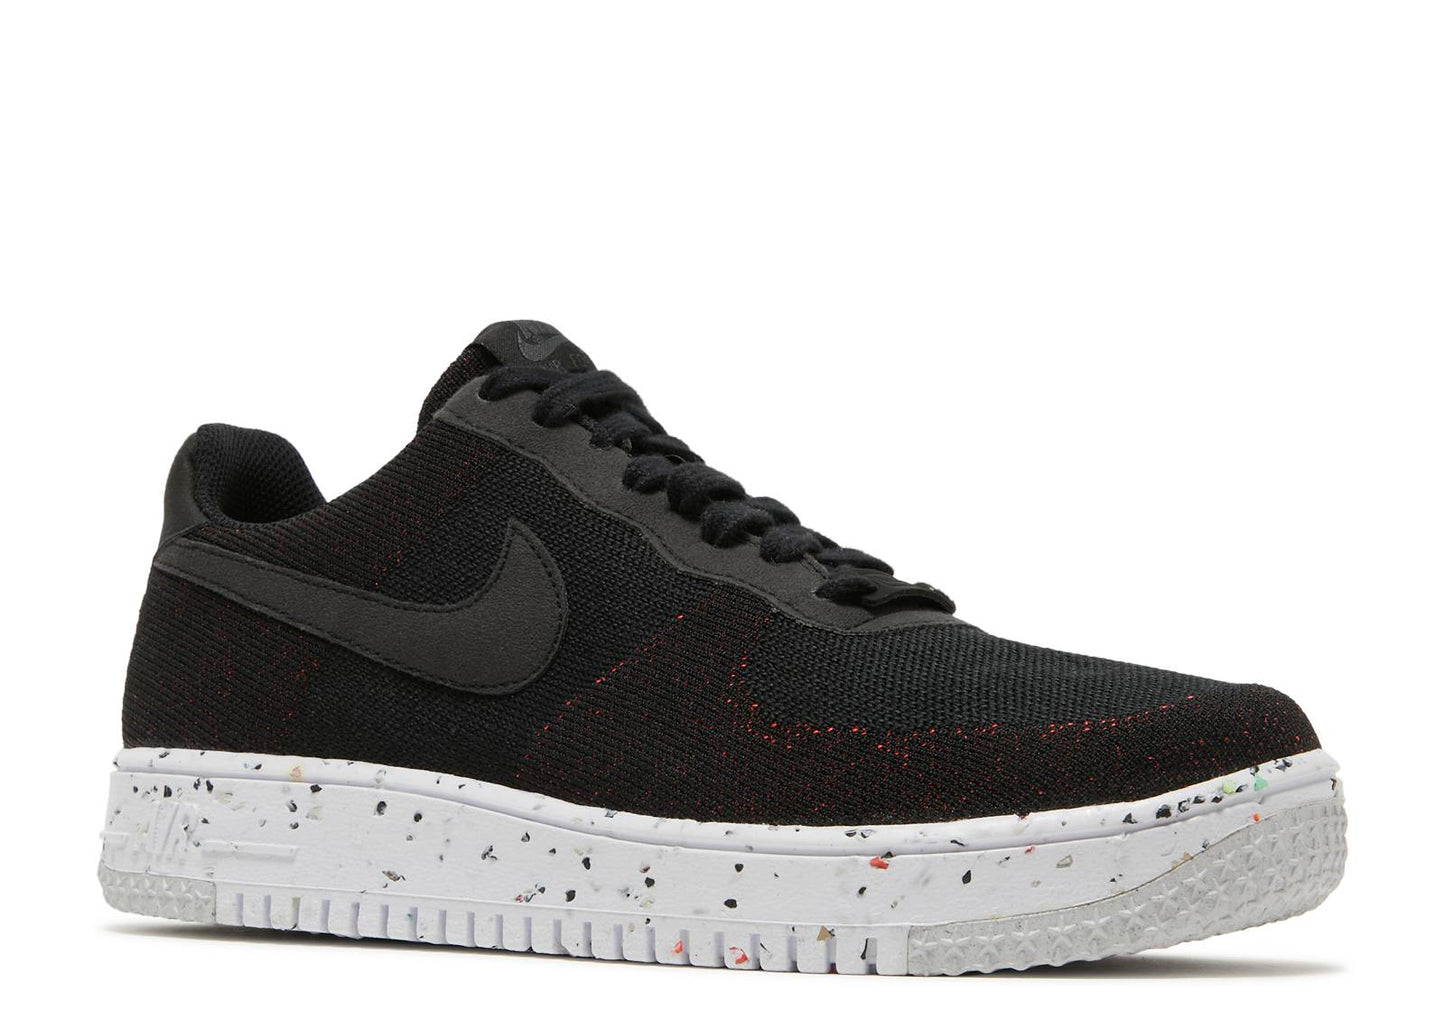 Nike Air Force 1 Low Crater Flyknit "Black/White"